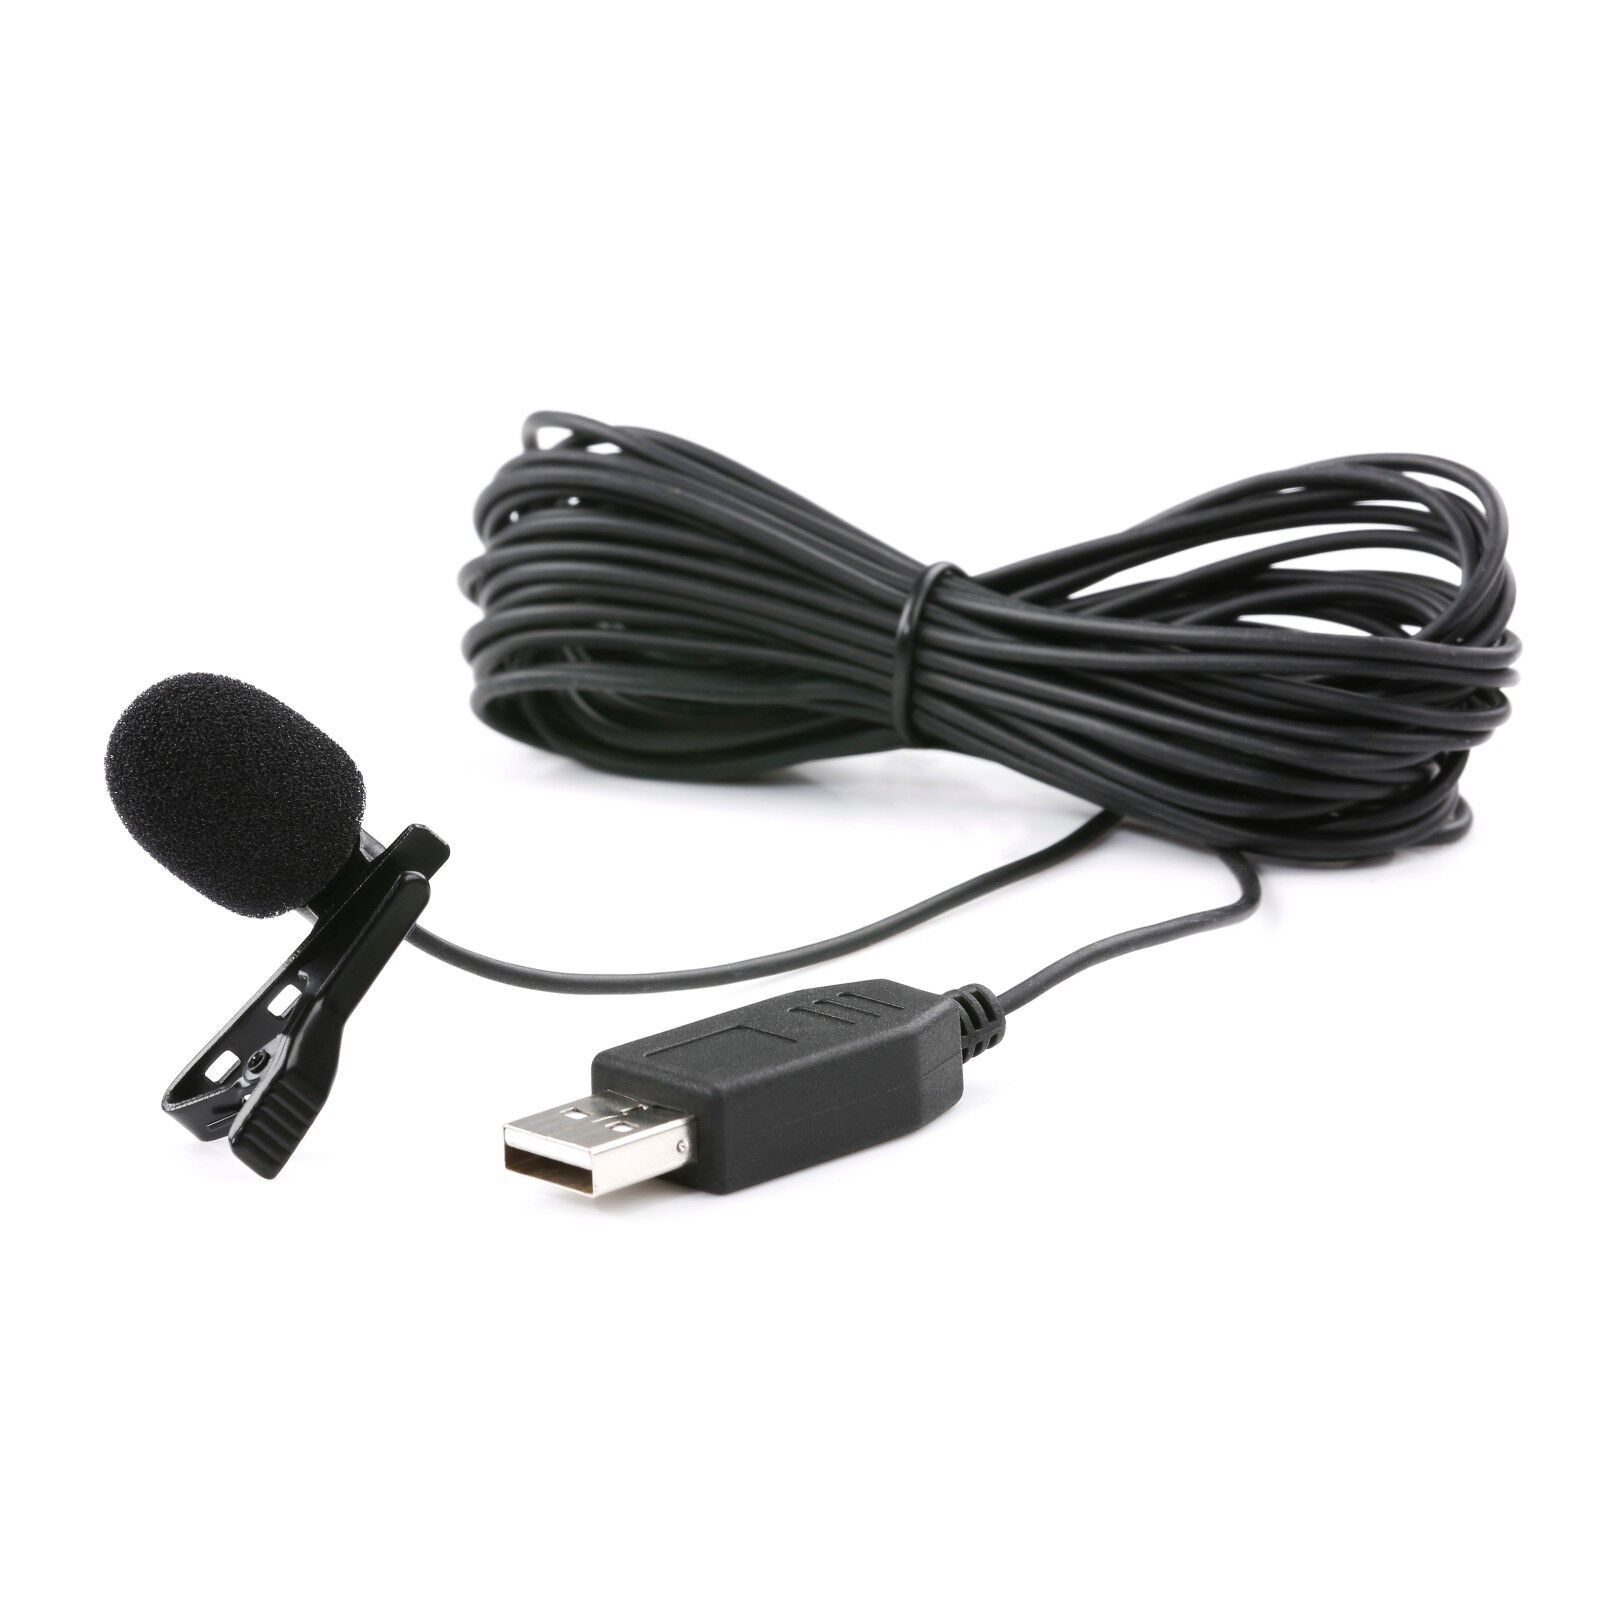 Movo M1 USB Lavalier Lapel Clip-on Computer Microphone for PC and Mac (20' Cord)